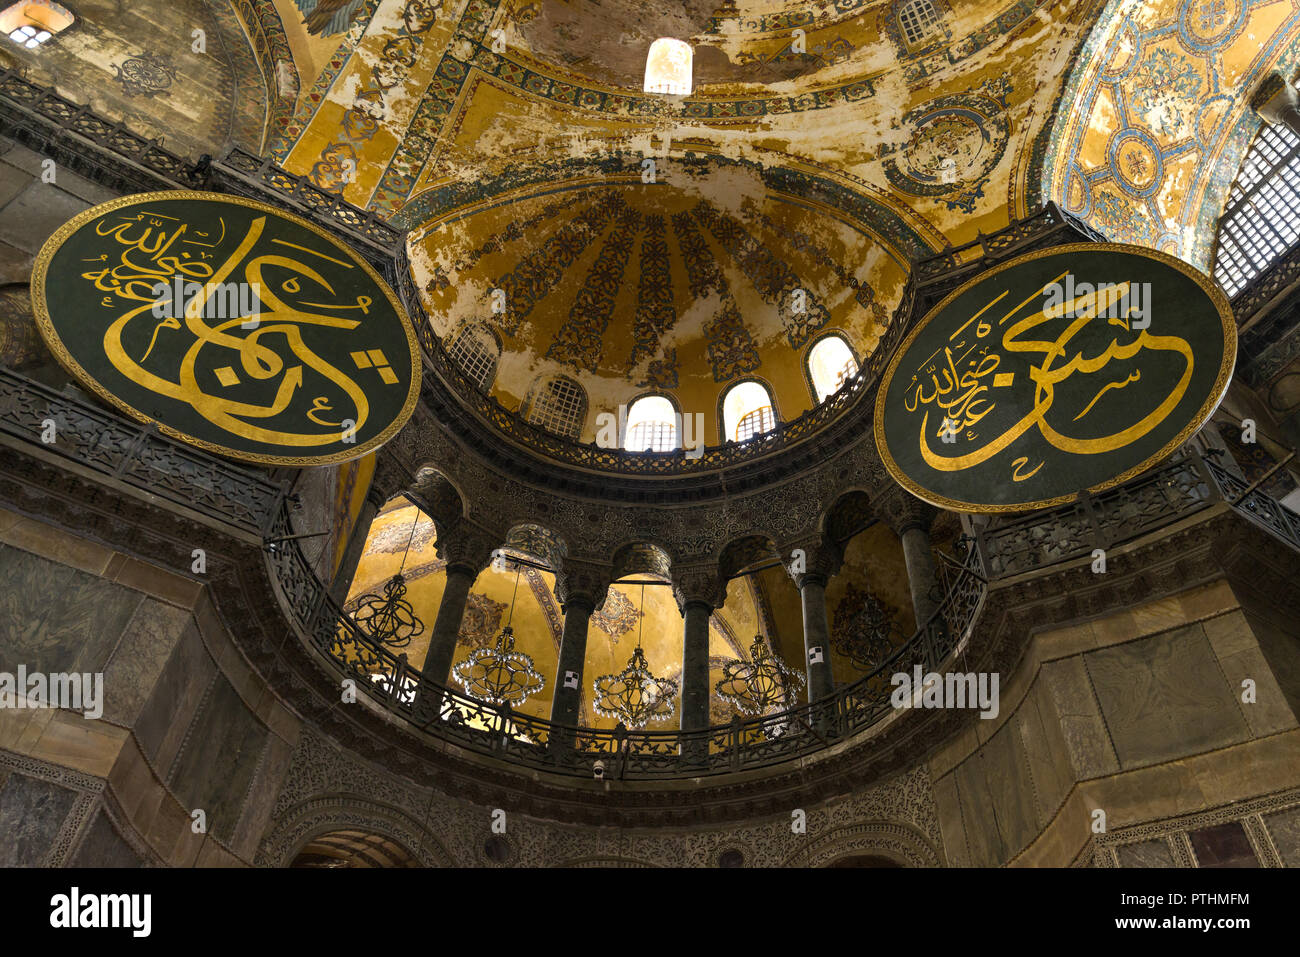 Interior of the Hagia Sophia museum with large calligraphic roundels on the upper walls of the building, Istanbul, Turkey Stock Photo